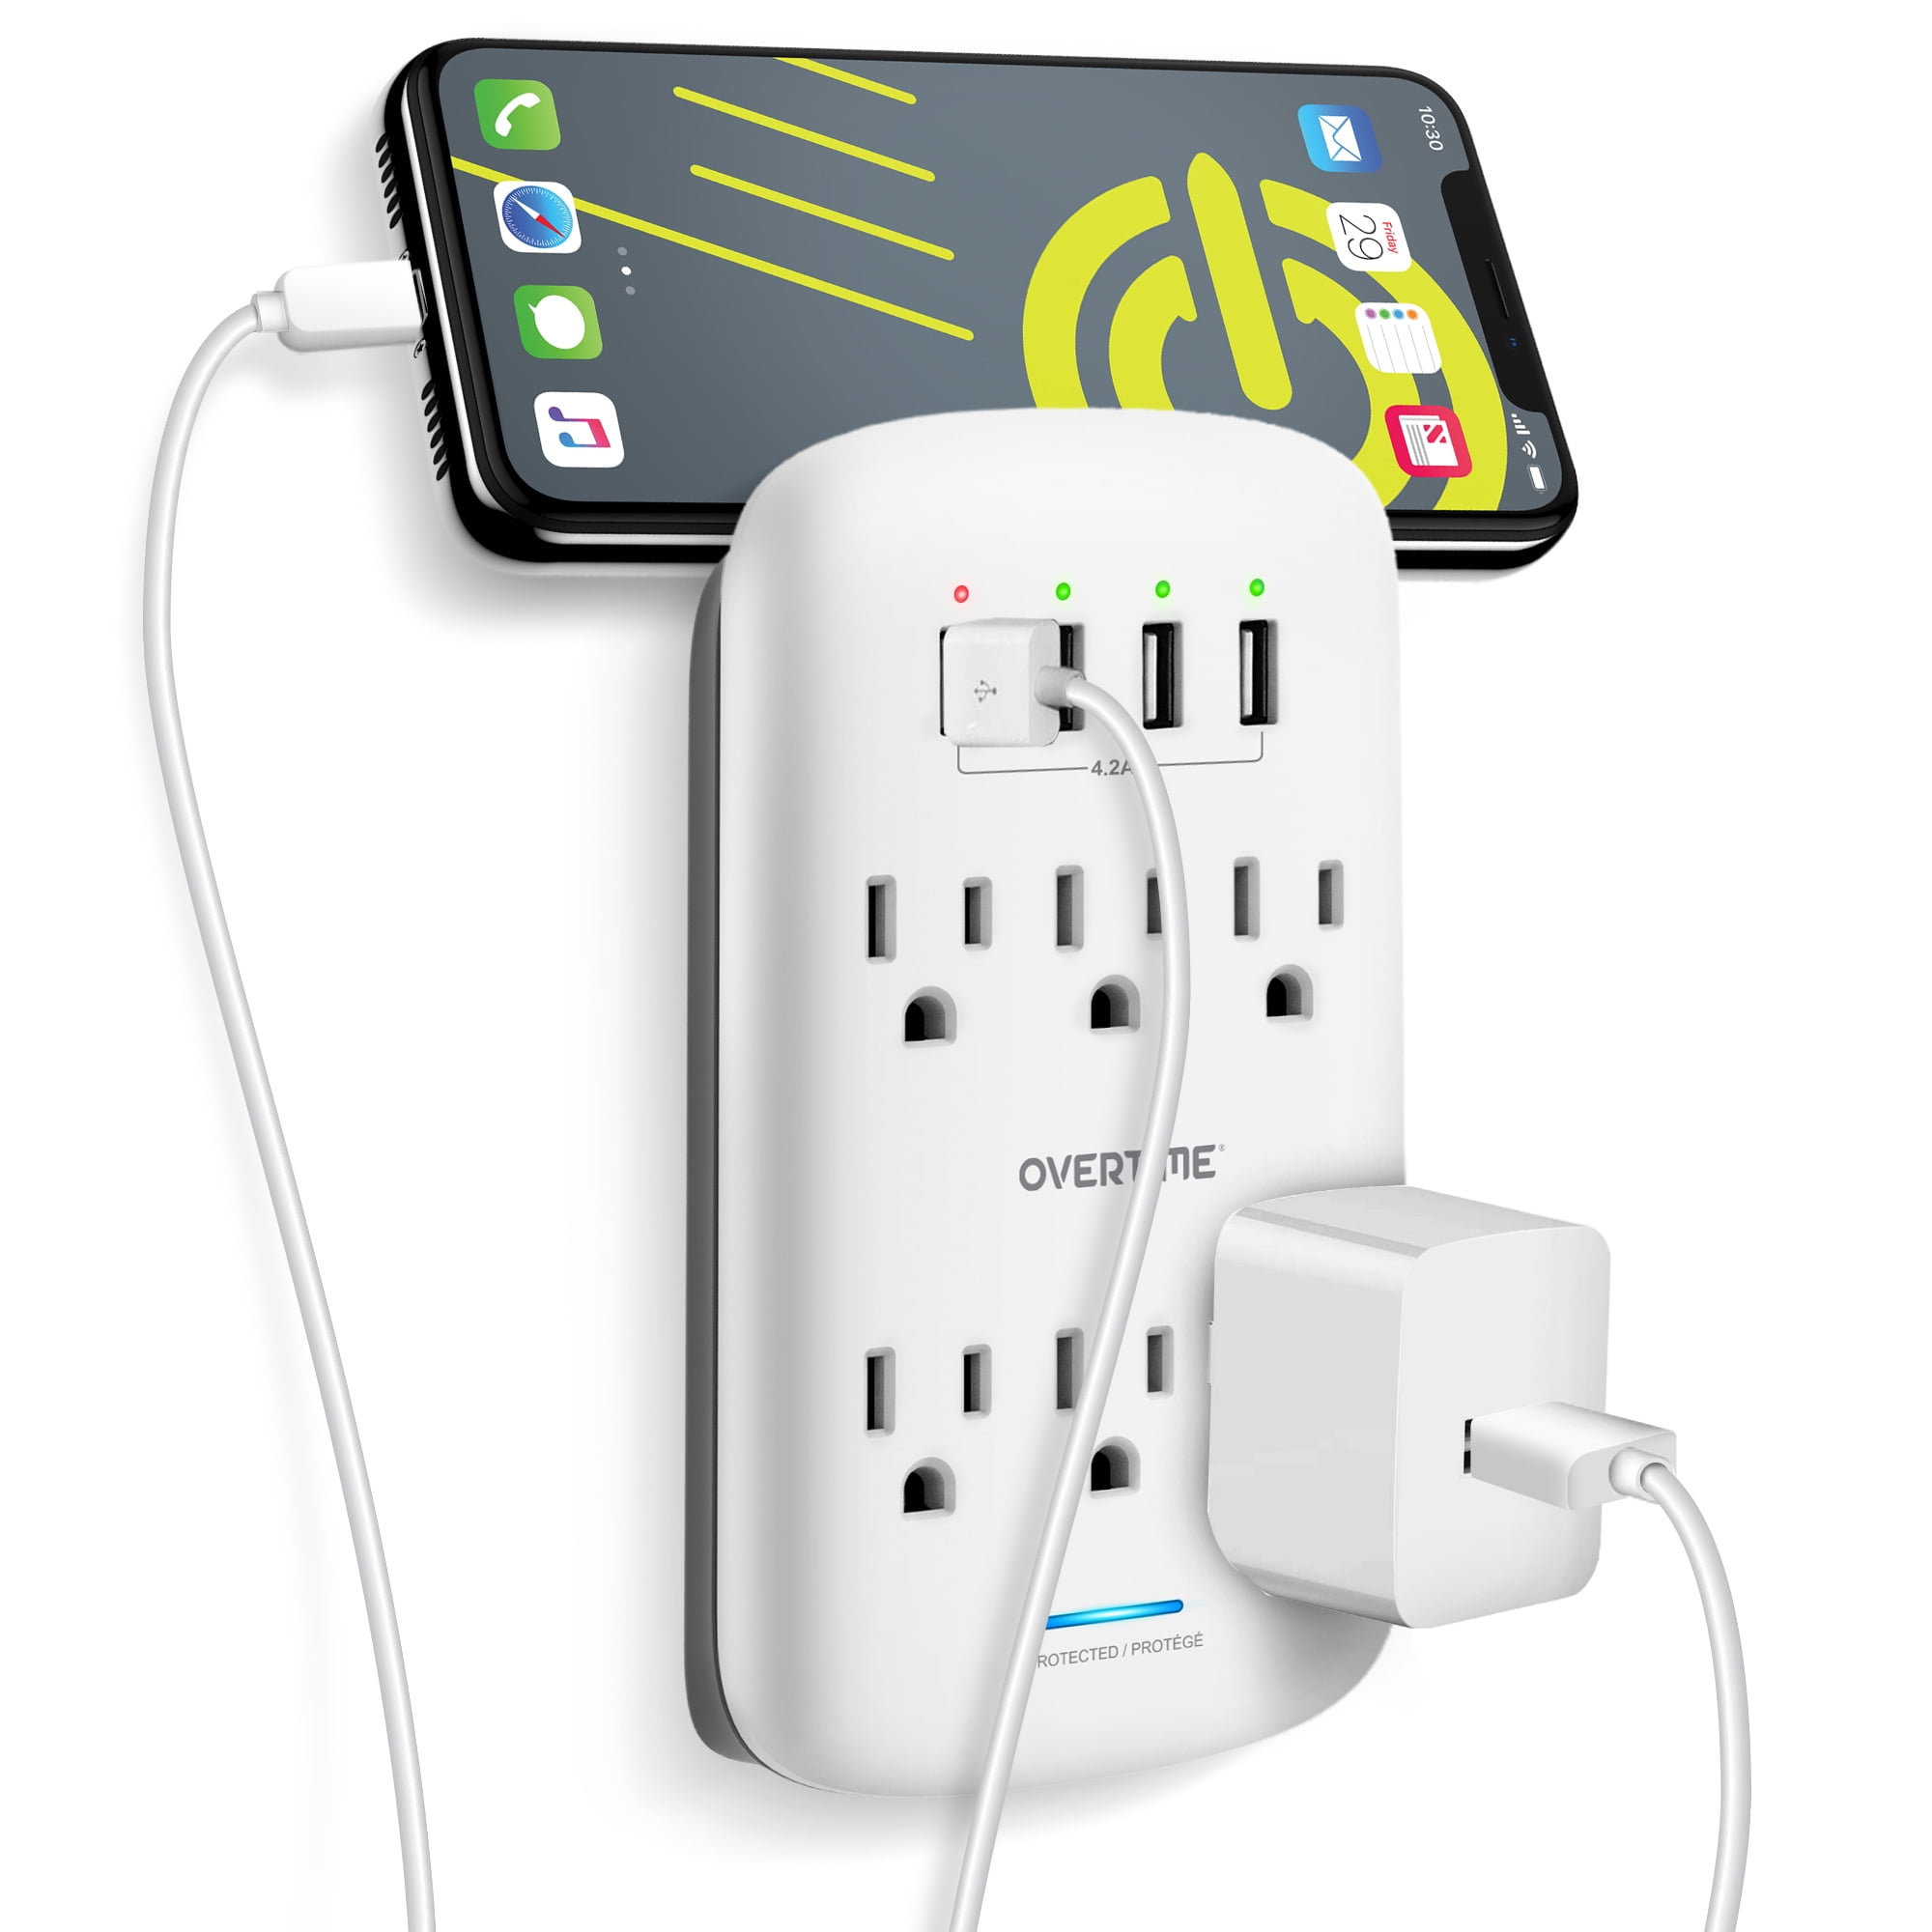 Surge Protector Multi Outlet Wall Outlet Extender with 6 Outlet 2 USB Ports